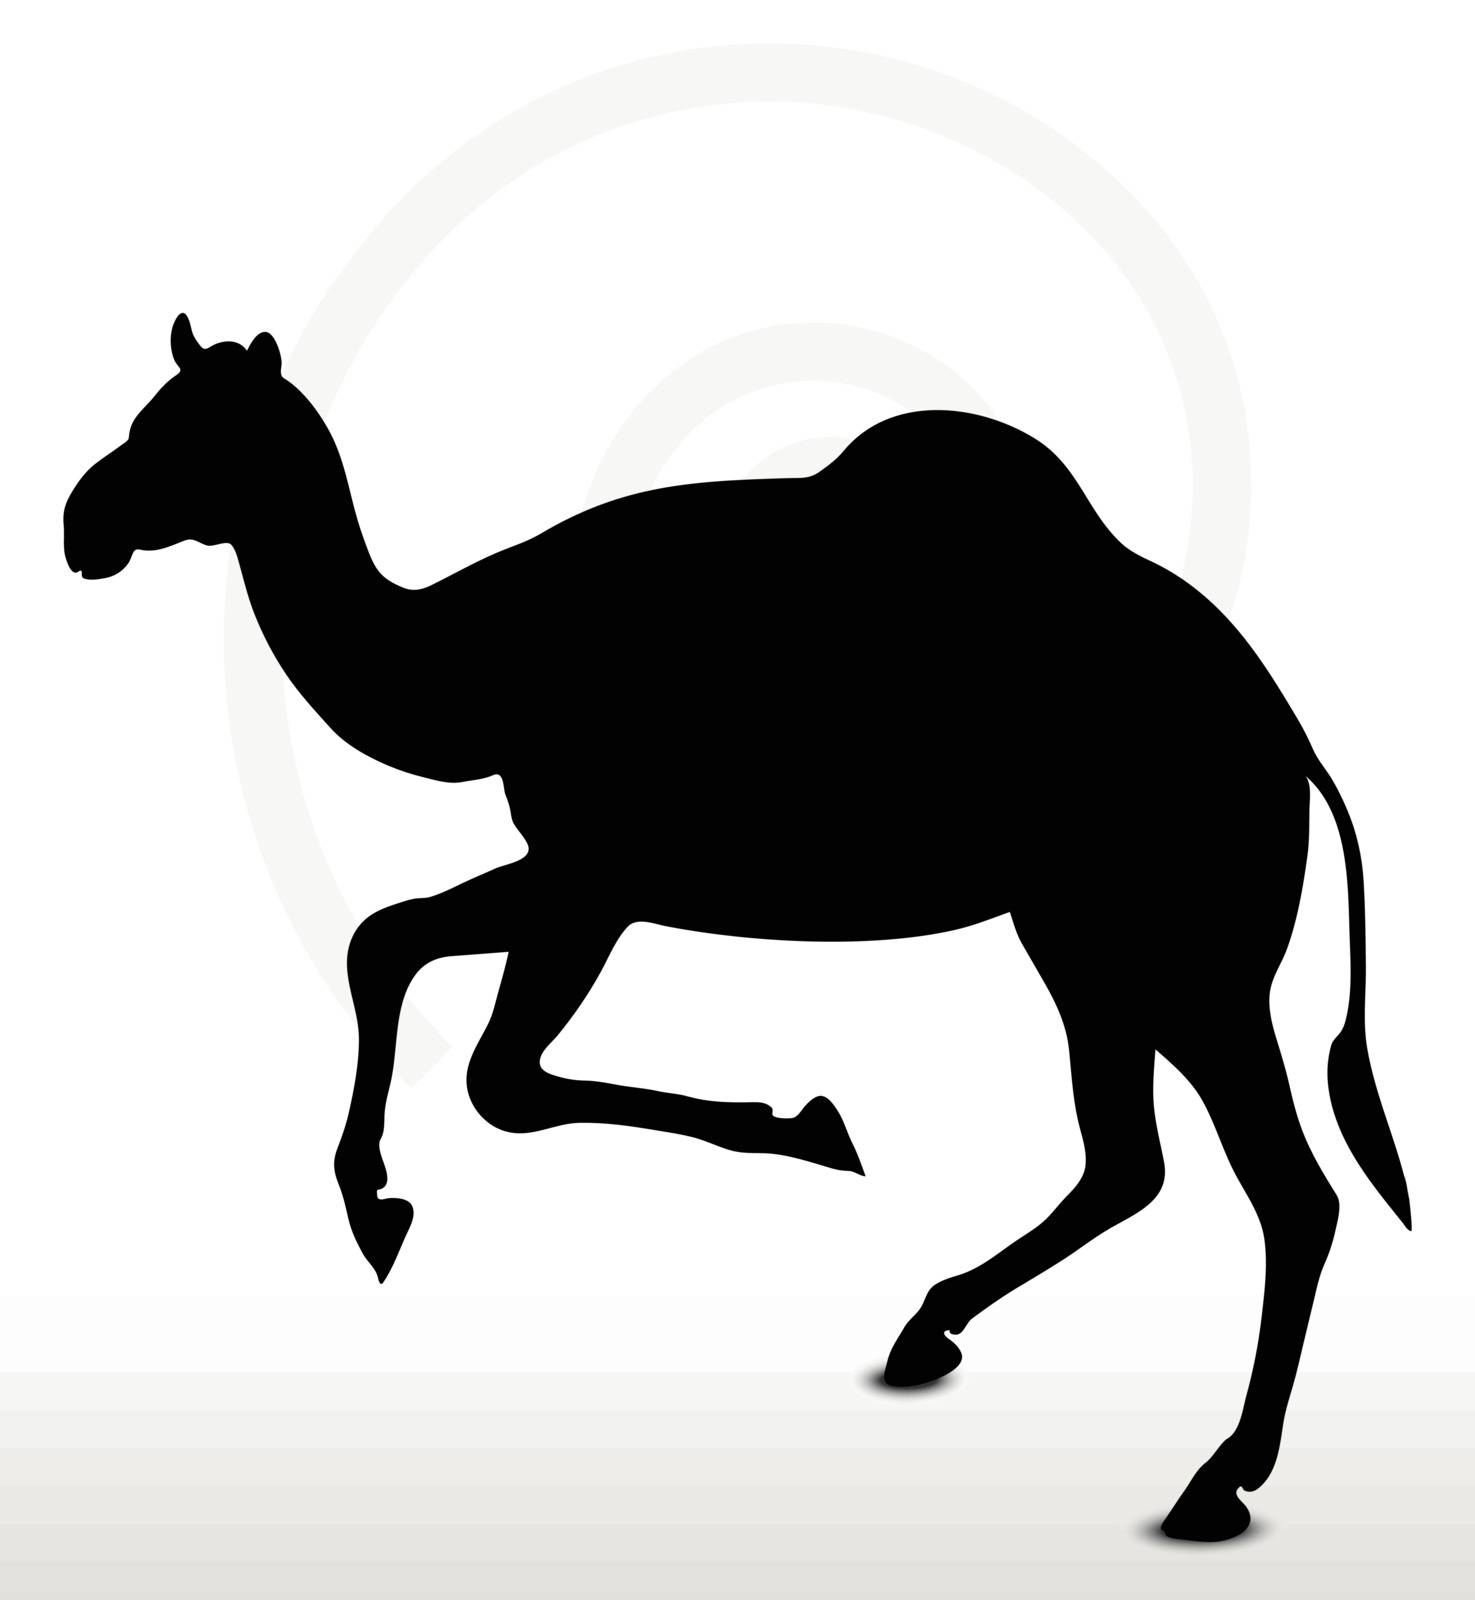 Vector Image - camel in Running pose  isolated on white background